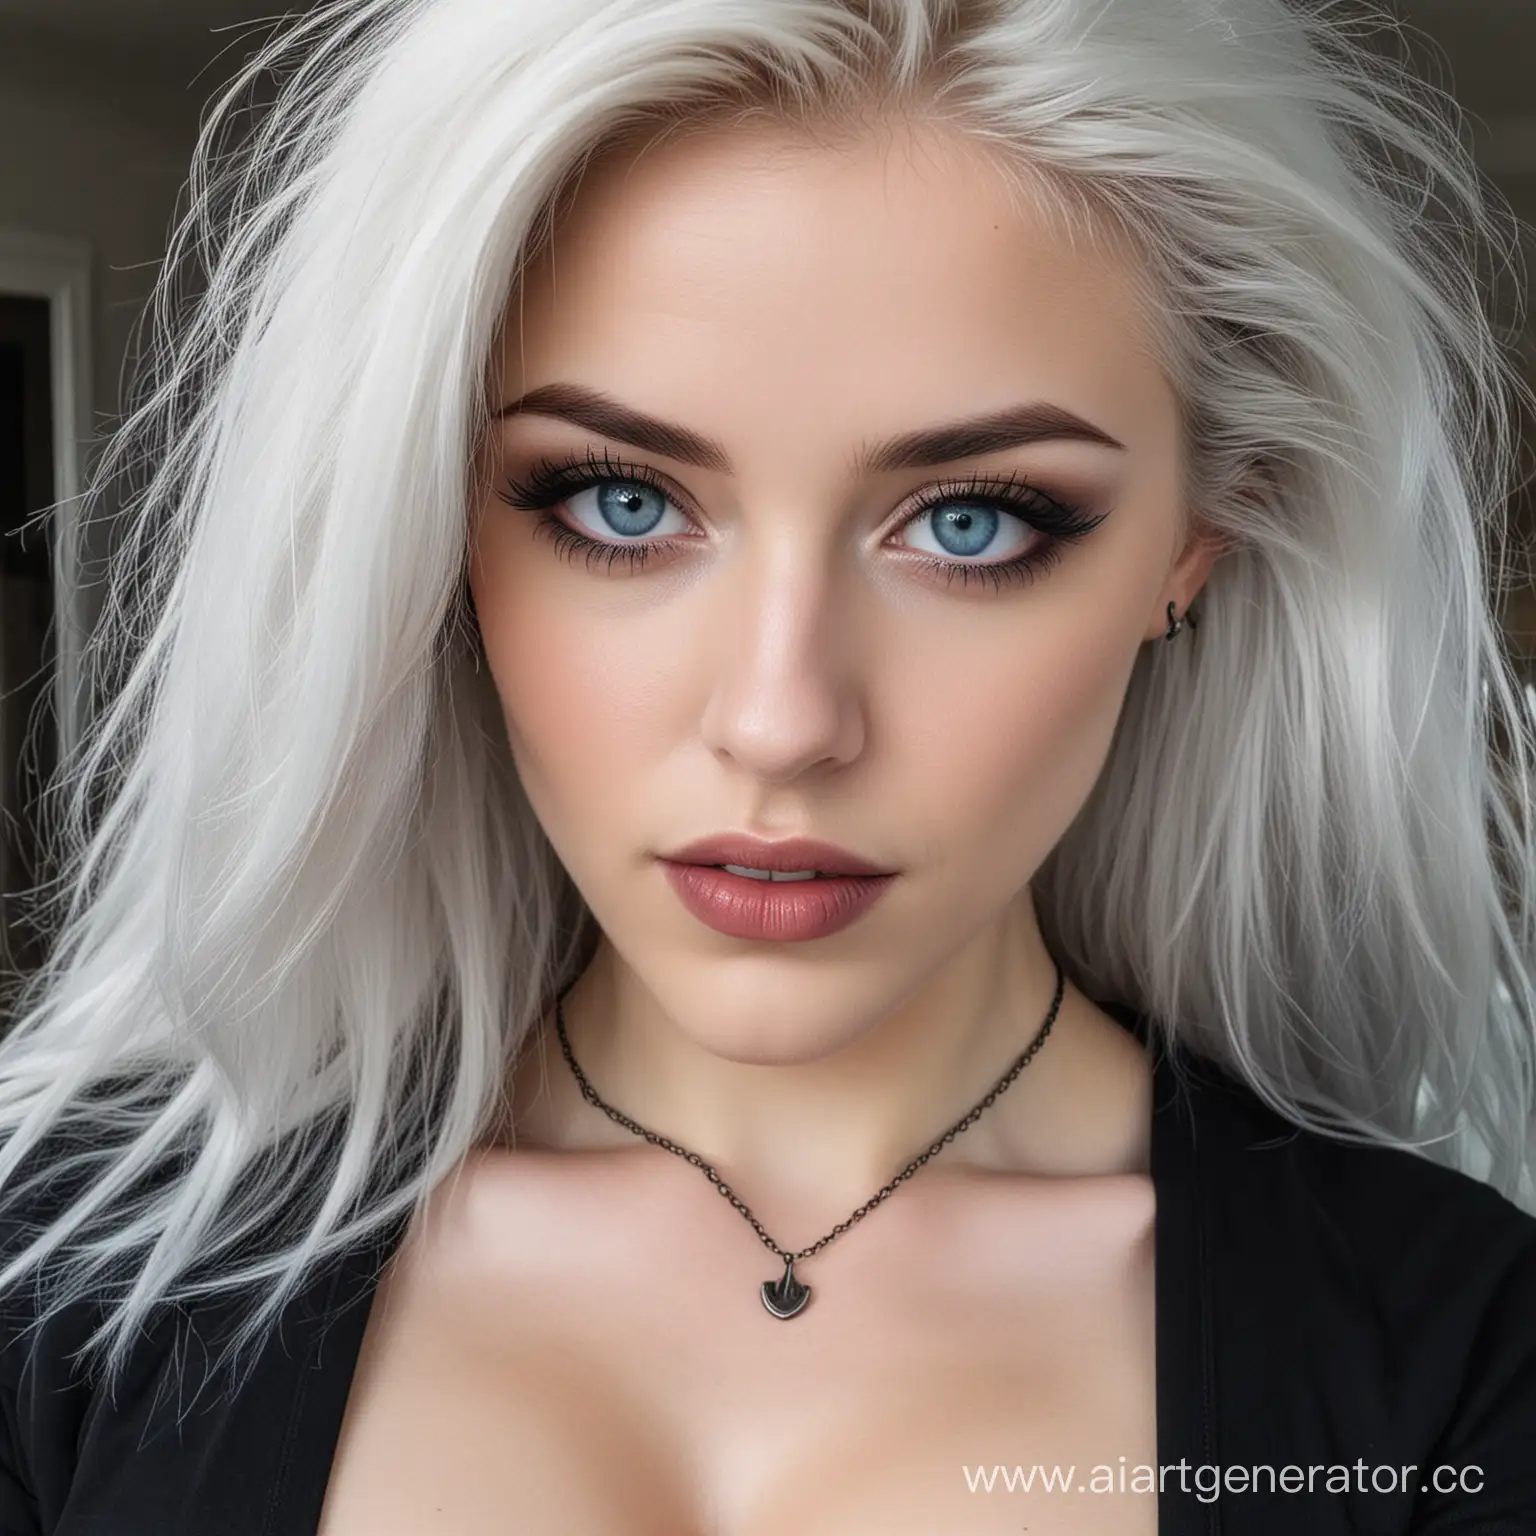 Sexy-Goth-White-Woman-with-Blue-Eyes-and-WellDefined-Jawline